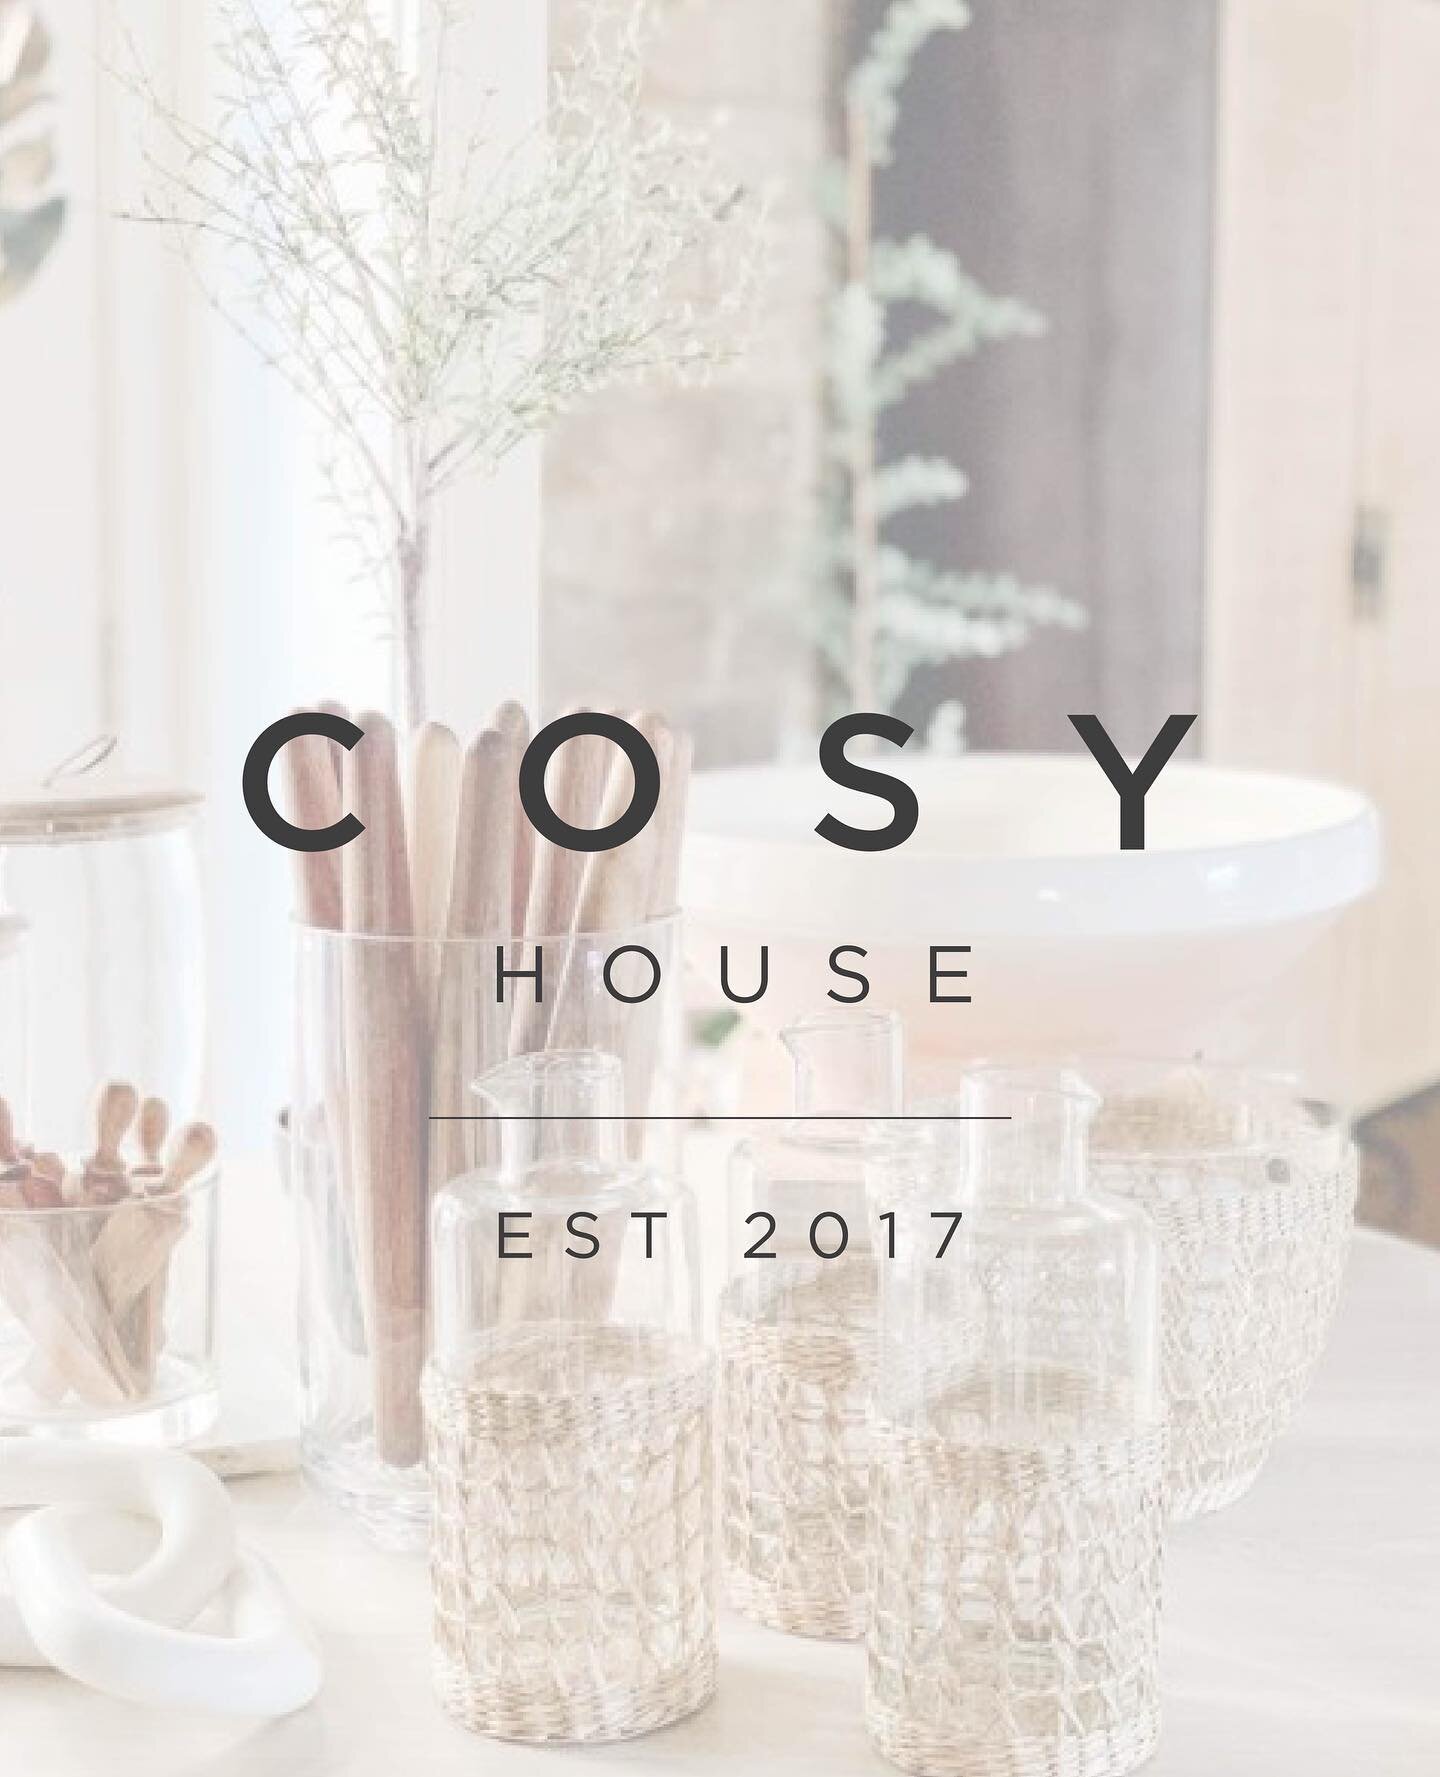 We are proud to welcome @becosyhouse to our foundry campus. Cosy is dedicated to sourcing unique, quality-driven furnishings, linens, home decor, and more. Can&rsquo;t wait for you all to experience the beautiful new showroom.